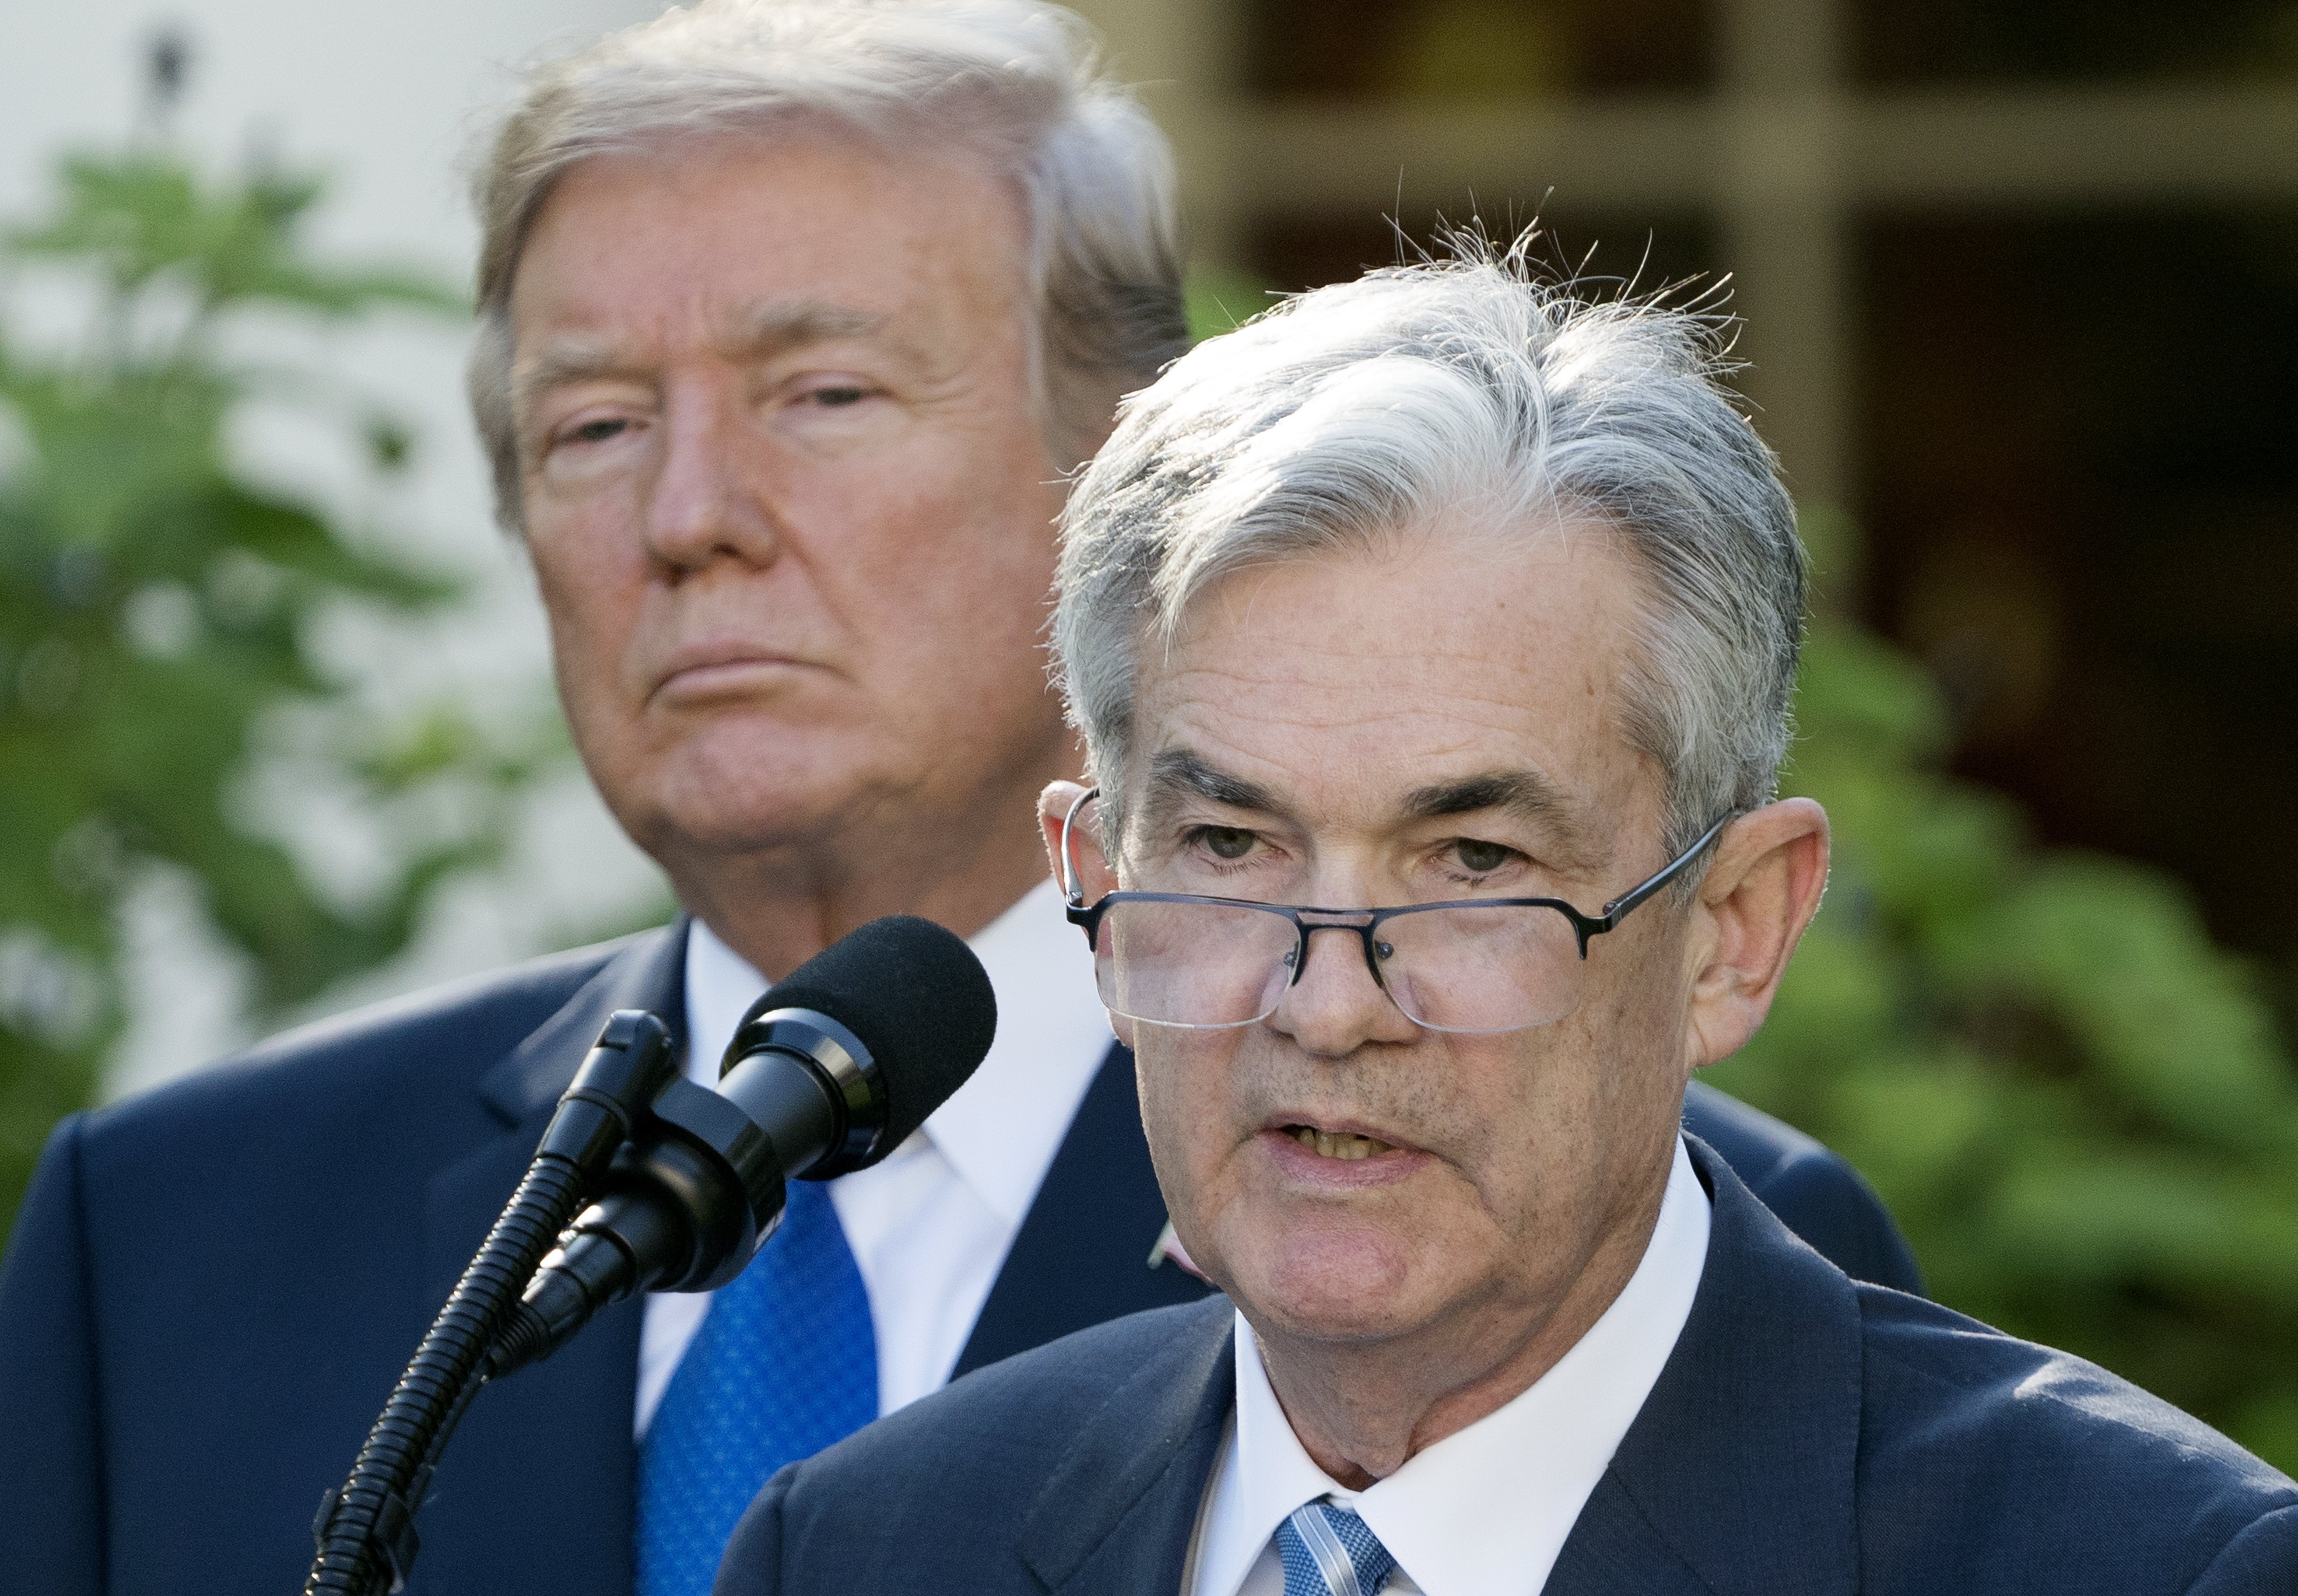 With the Dow giving up its 2018 gains, the stock market is fizzling as proof that Trump’s policies are winners
               Tame inflation in the US supports the Fed’s current rate policies, which continue the pattern set by the previous Fed chairman